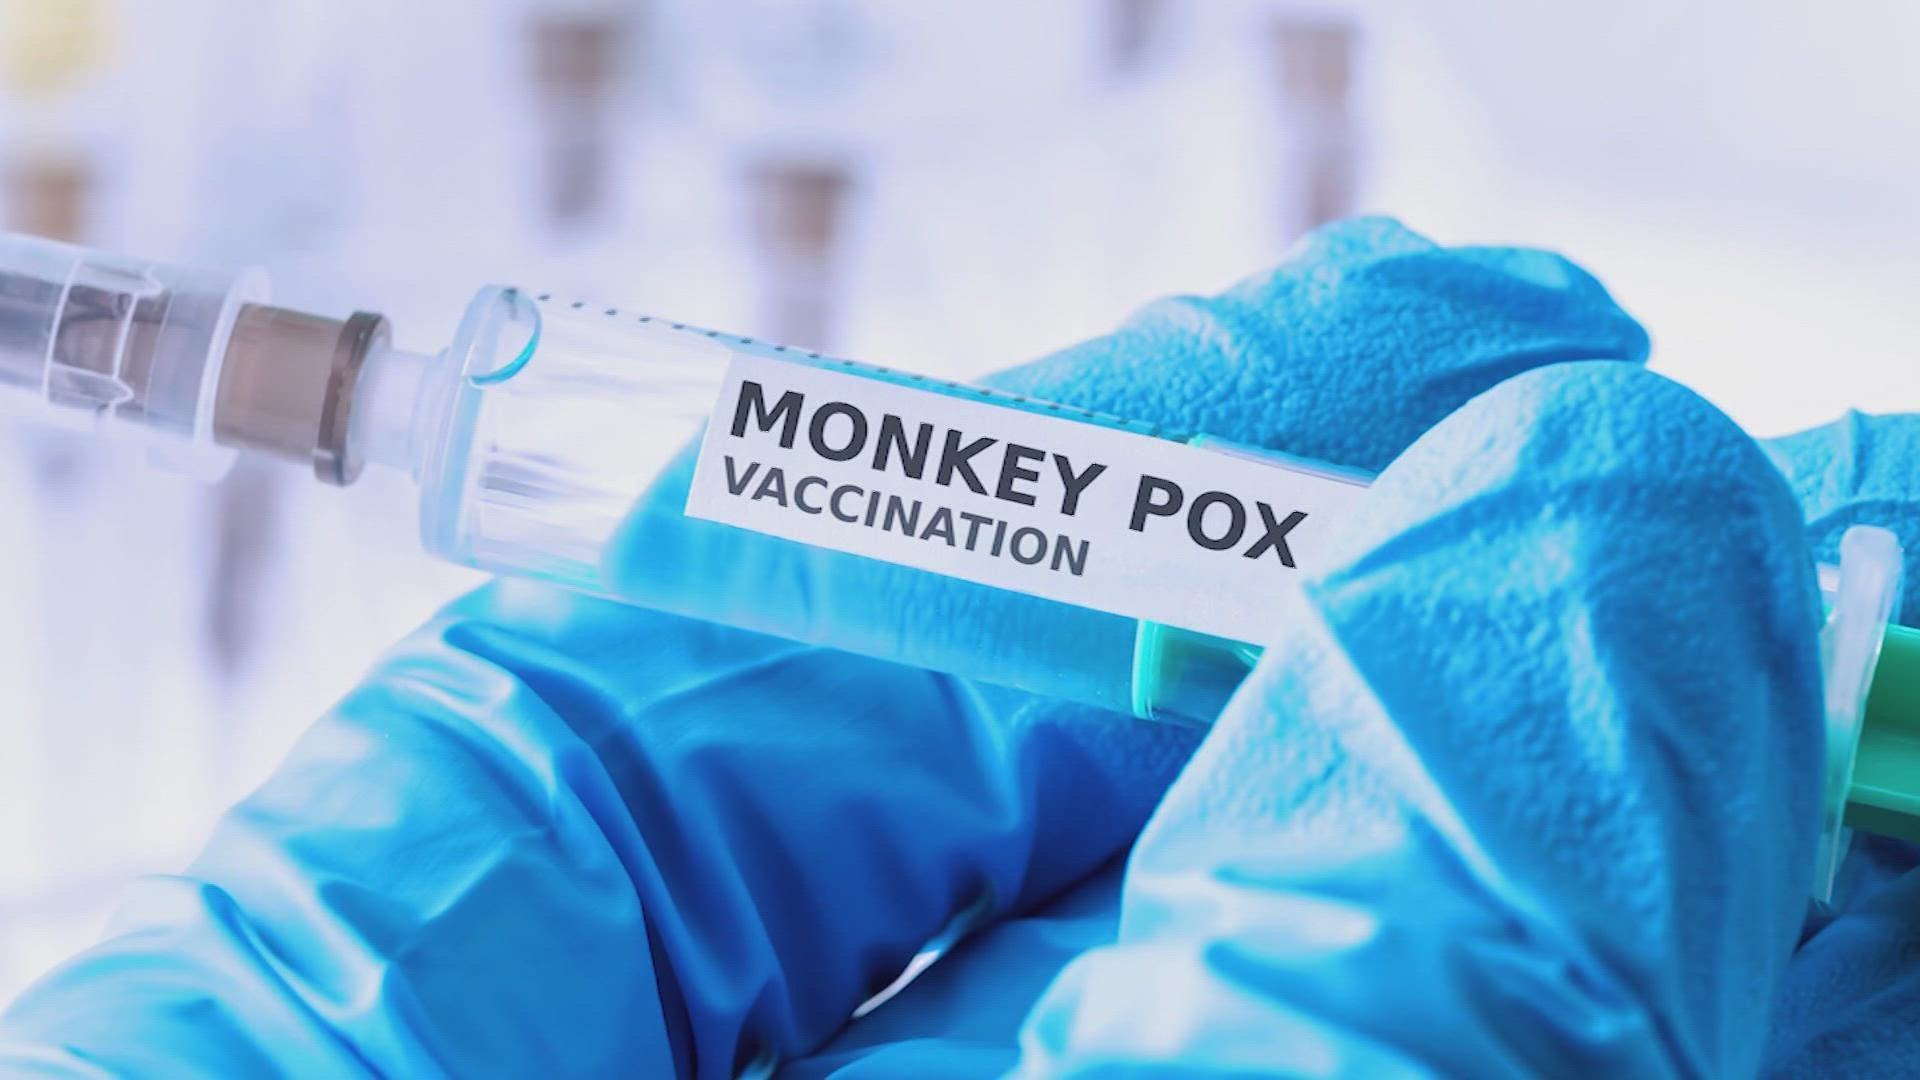 Some who have come in contact with people infected with monkeypox say they're having trouble getting access to the vaccine.